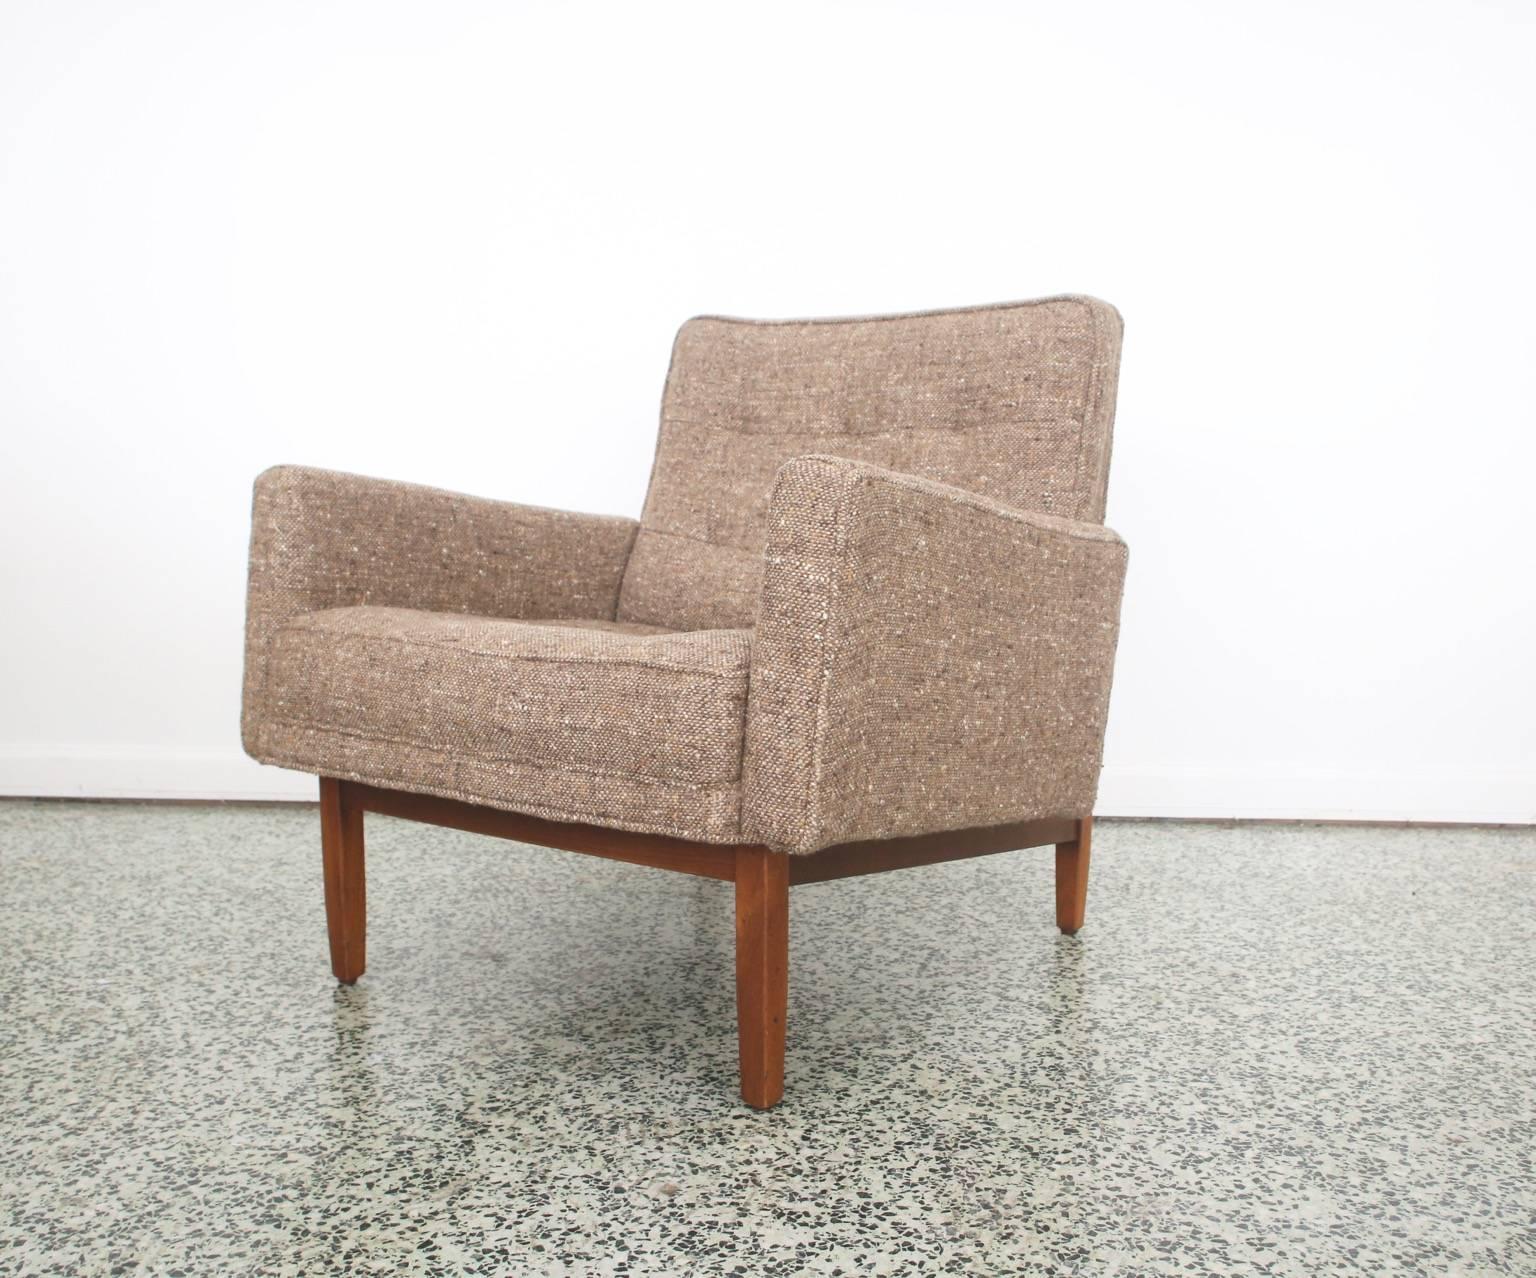 Very hard to find early pair of Florence Knoll long chairs. Chair model 51T. Original fabric. Solid walnut frames in very nice shape. Great opportunity to own a set of rarely seen armchairs.